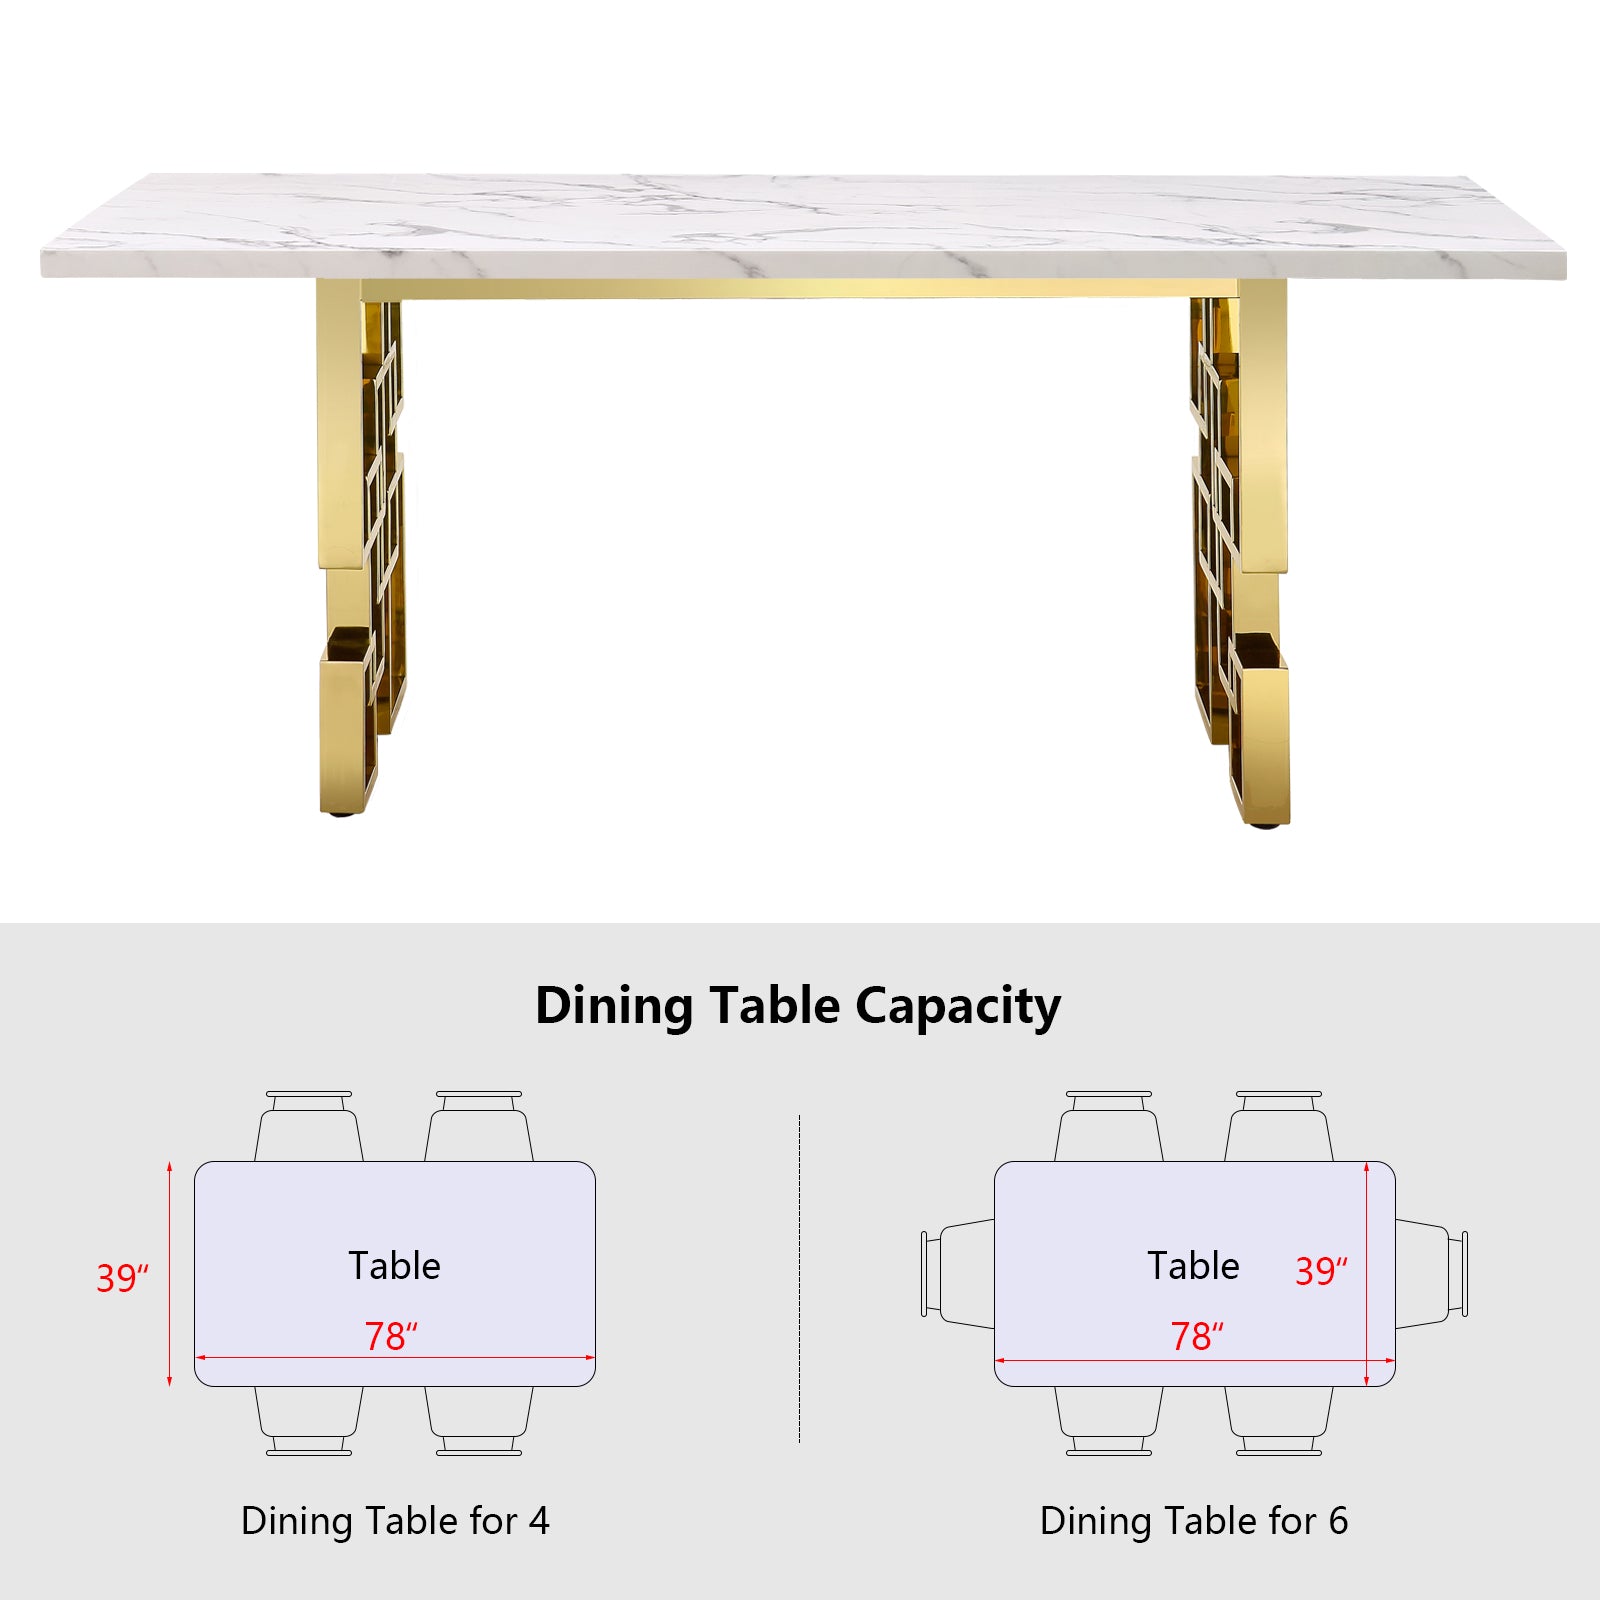 White dining table | 78" Rectangle Top | Gold Metal geometric legs | T219